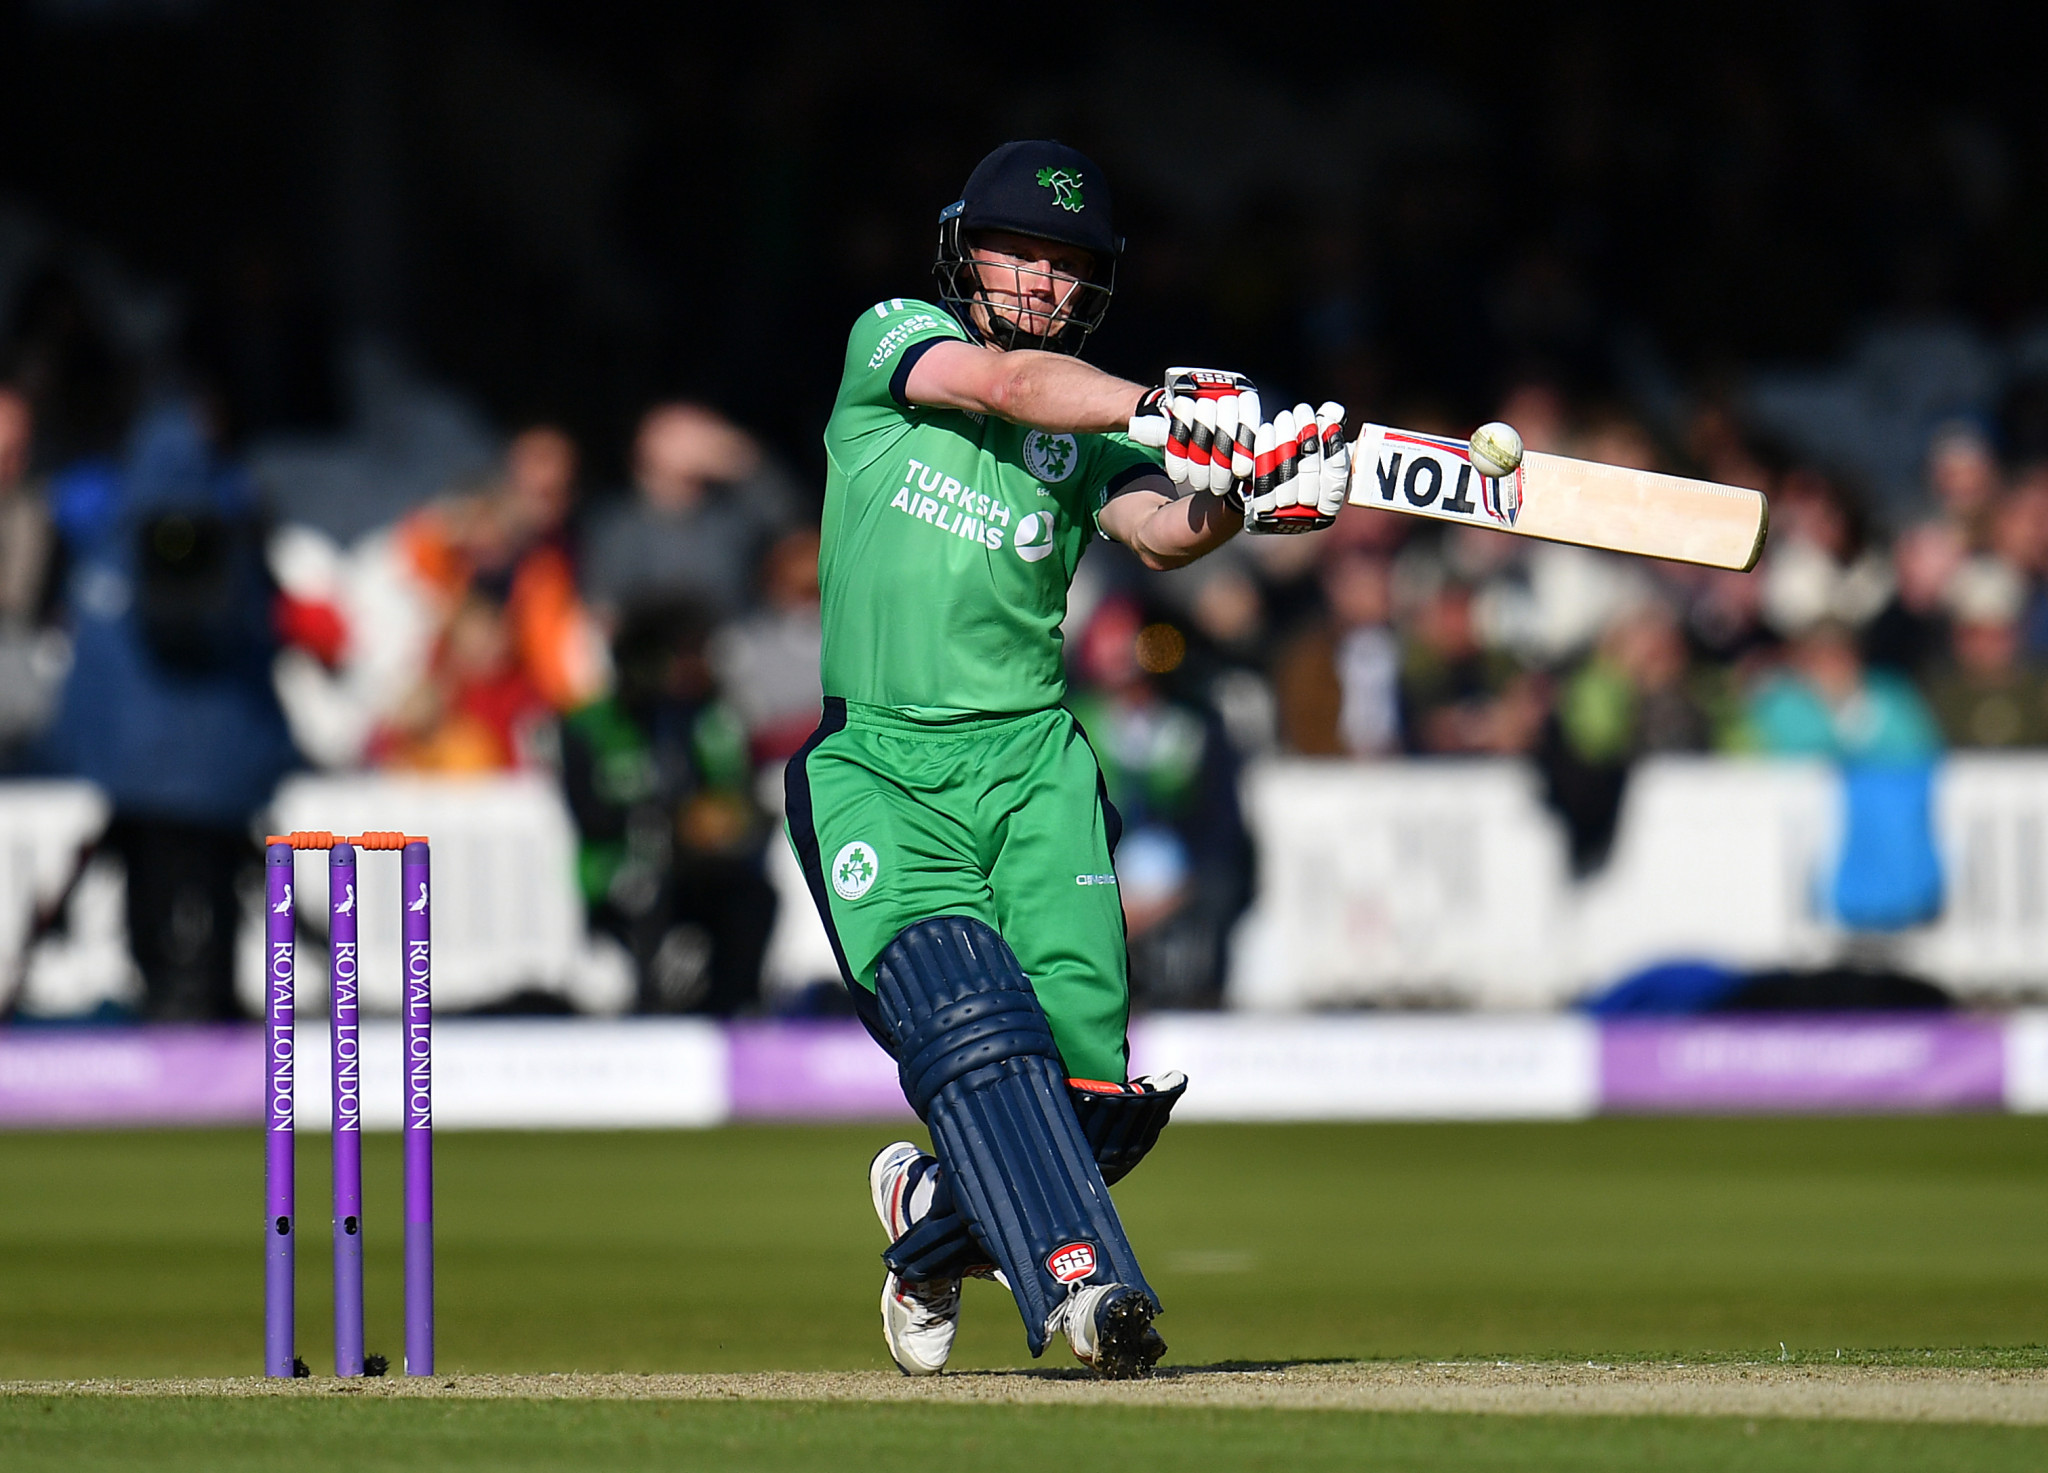 Cricket Ireland is looking forward to hosting Pakistan for its first test match next year ©Cricket Ireland/Facebook